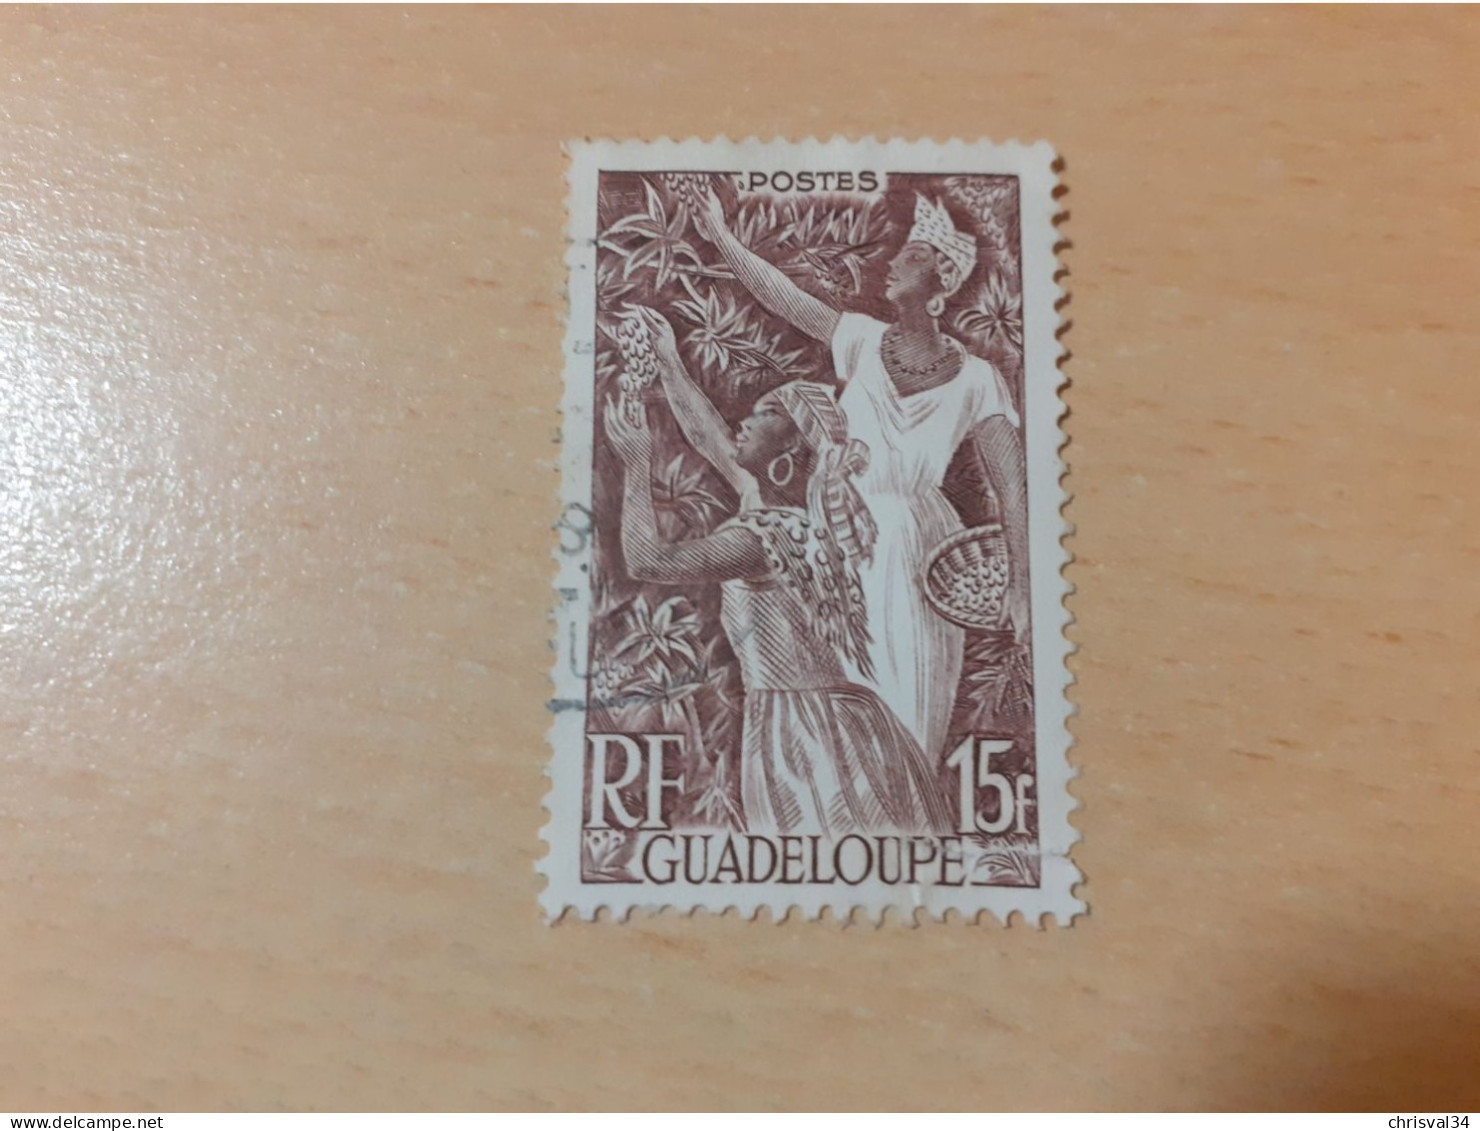 TIMBRE   GUADELOUPE       N  210    COTE  1,50   EUROS  OBLITERE - Used Stamps